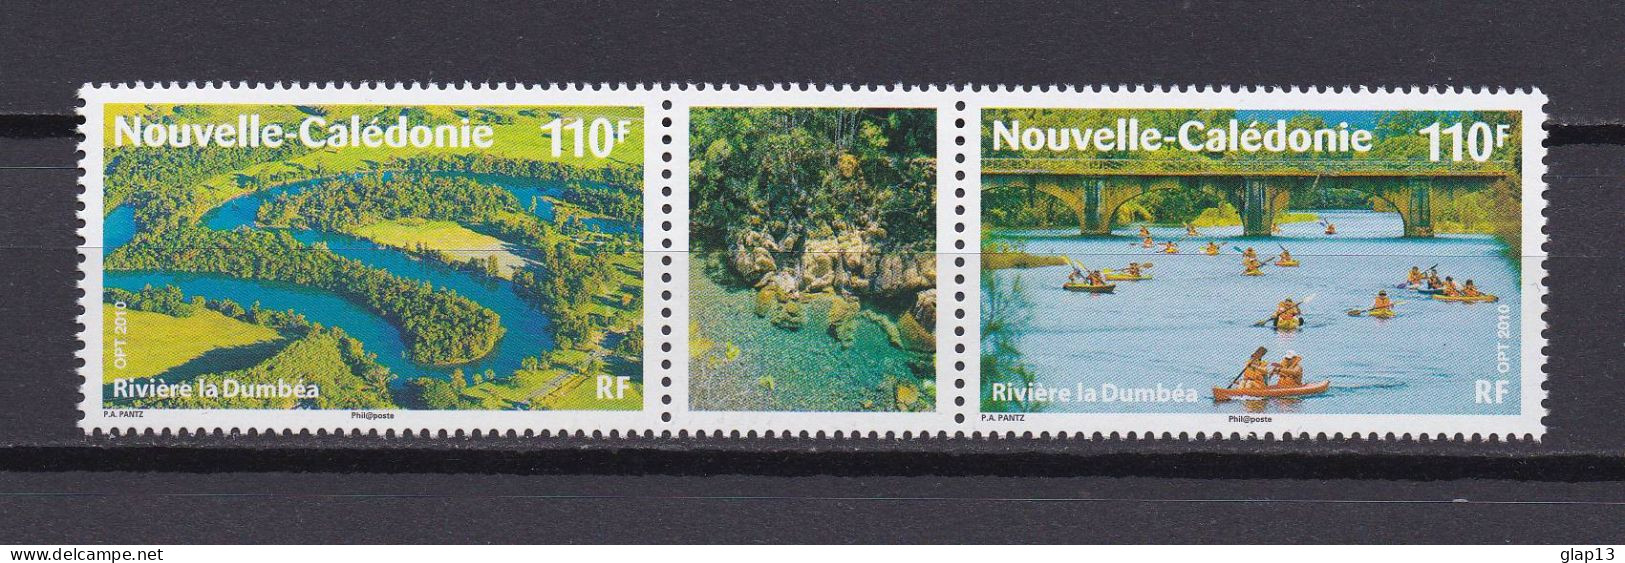 NOUVELLE-CALEDONIE 2010 TIMBRE N°1094/95 NEUF** PAYSAGE - Ungebraucht